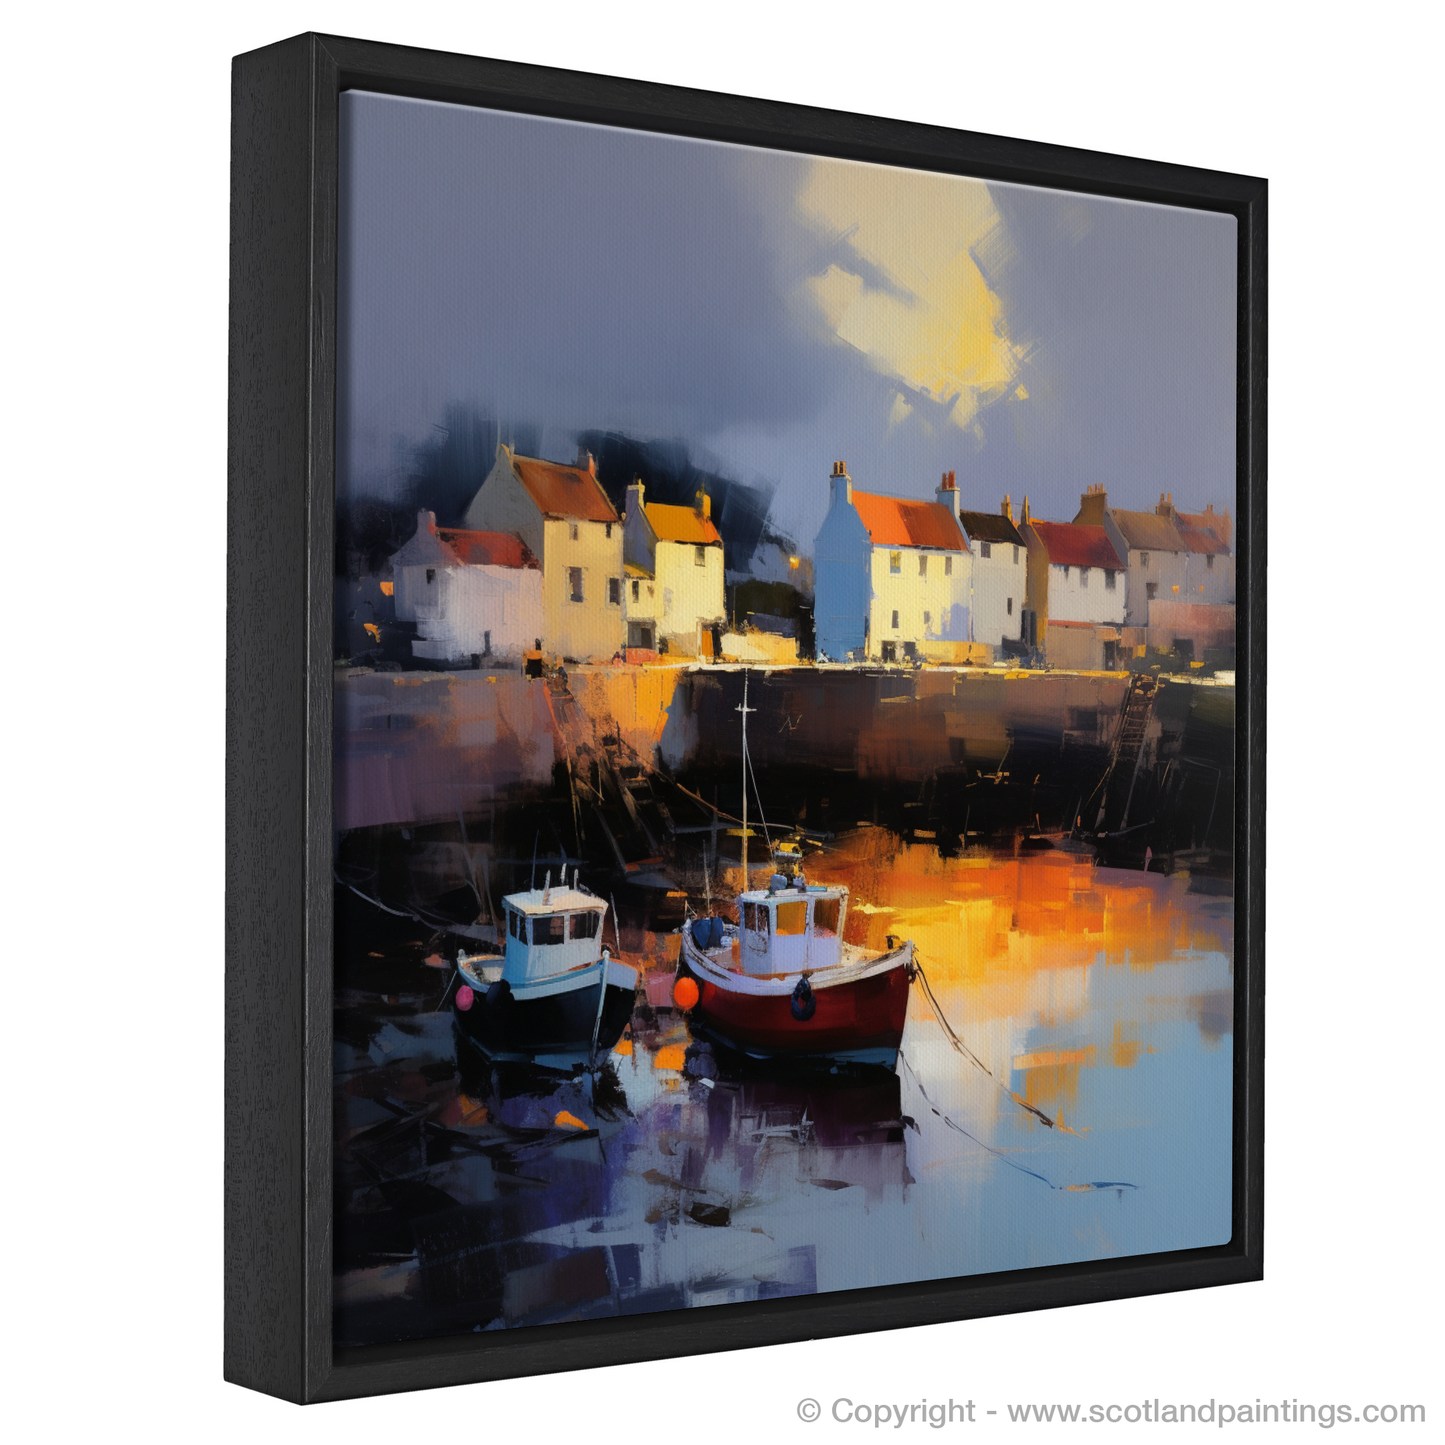 Crail Harbour at Dusk: An Expressionist Ode to Scottish Coastal Serenity